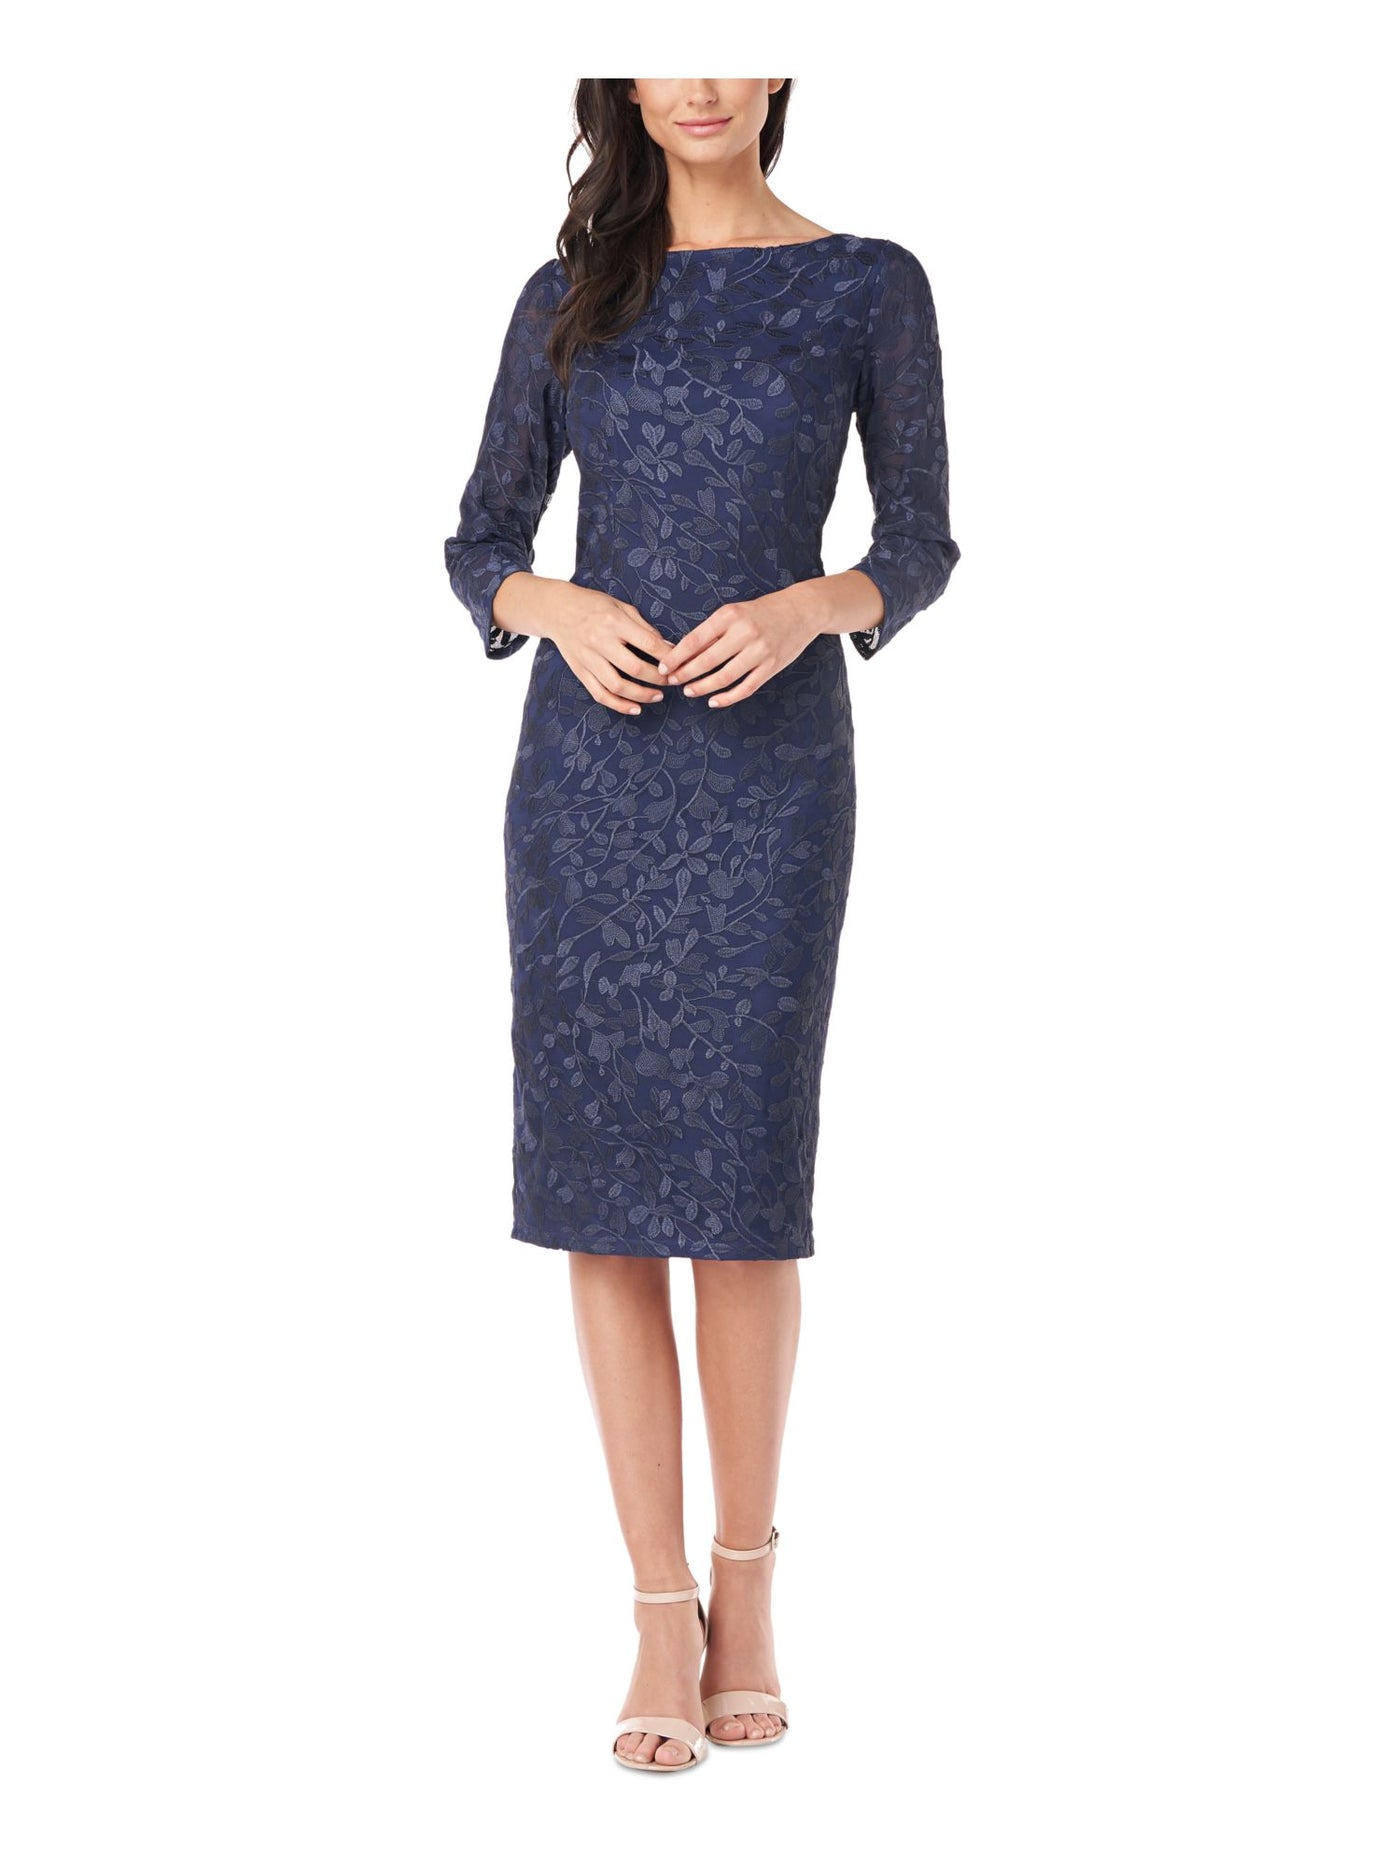 JS COLLECTION Womens Navy Embroidered Zippered 3/4 Sleeve Boat Neck Below The Knee Evening Sheath Dress 2